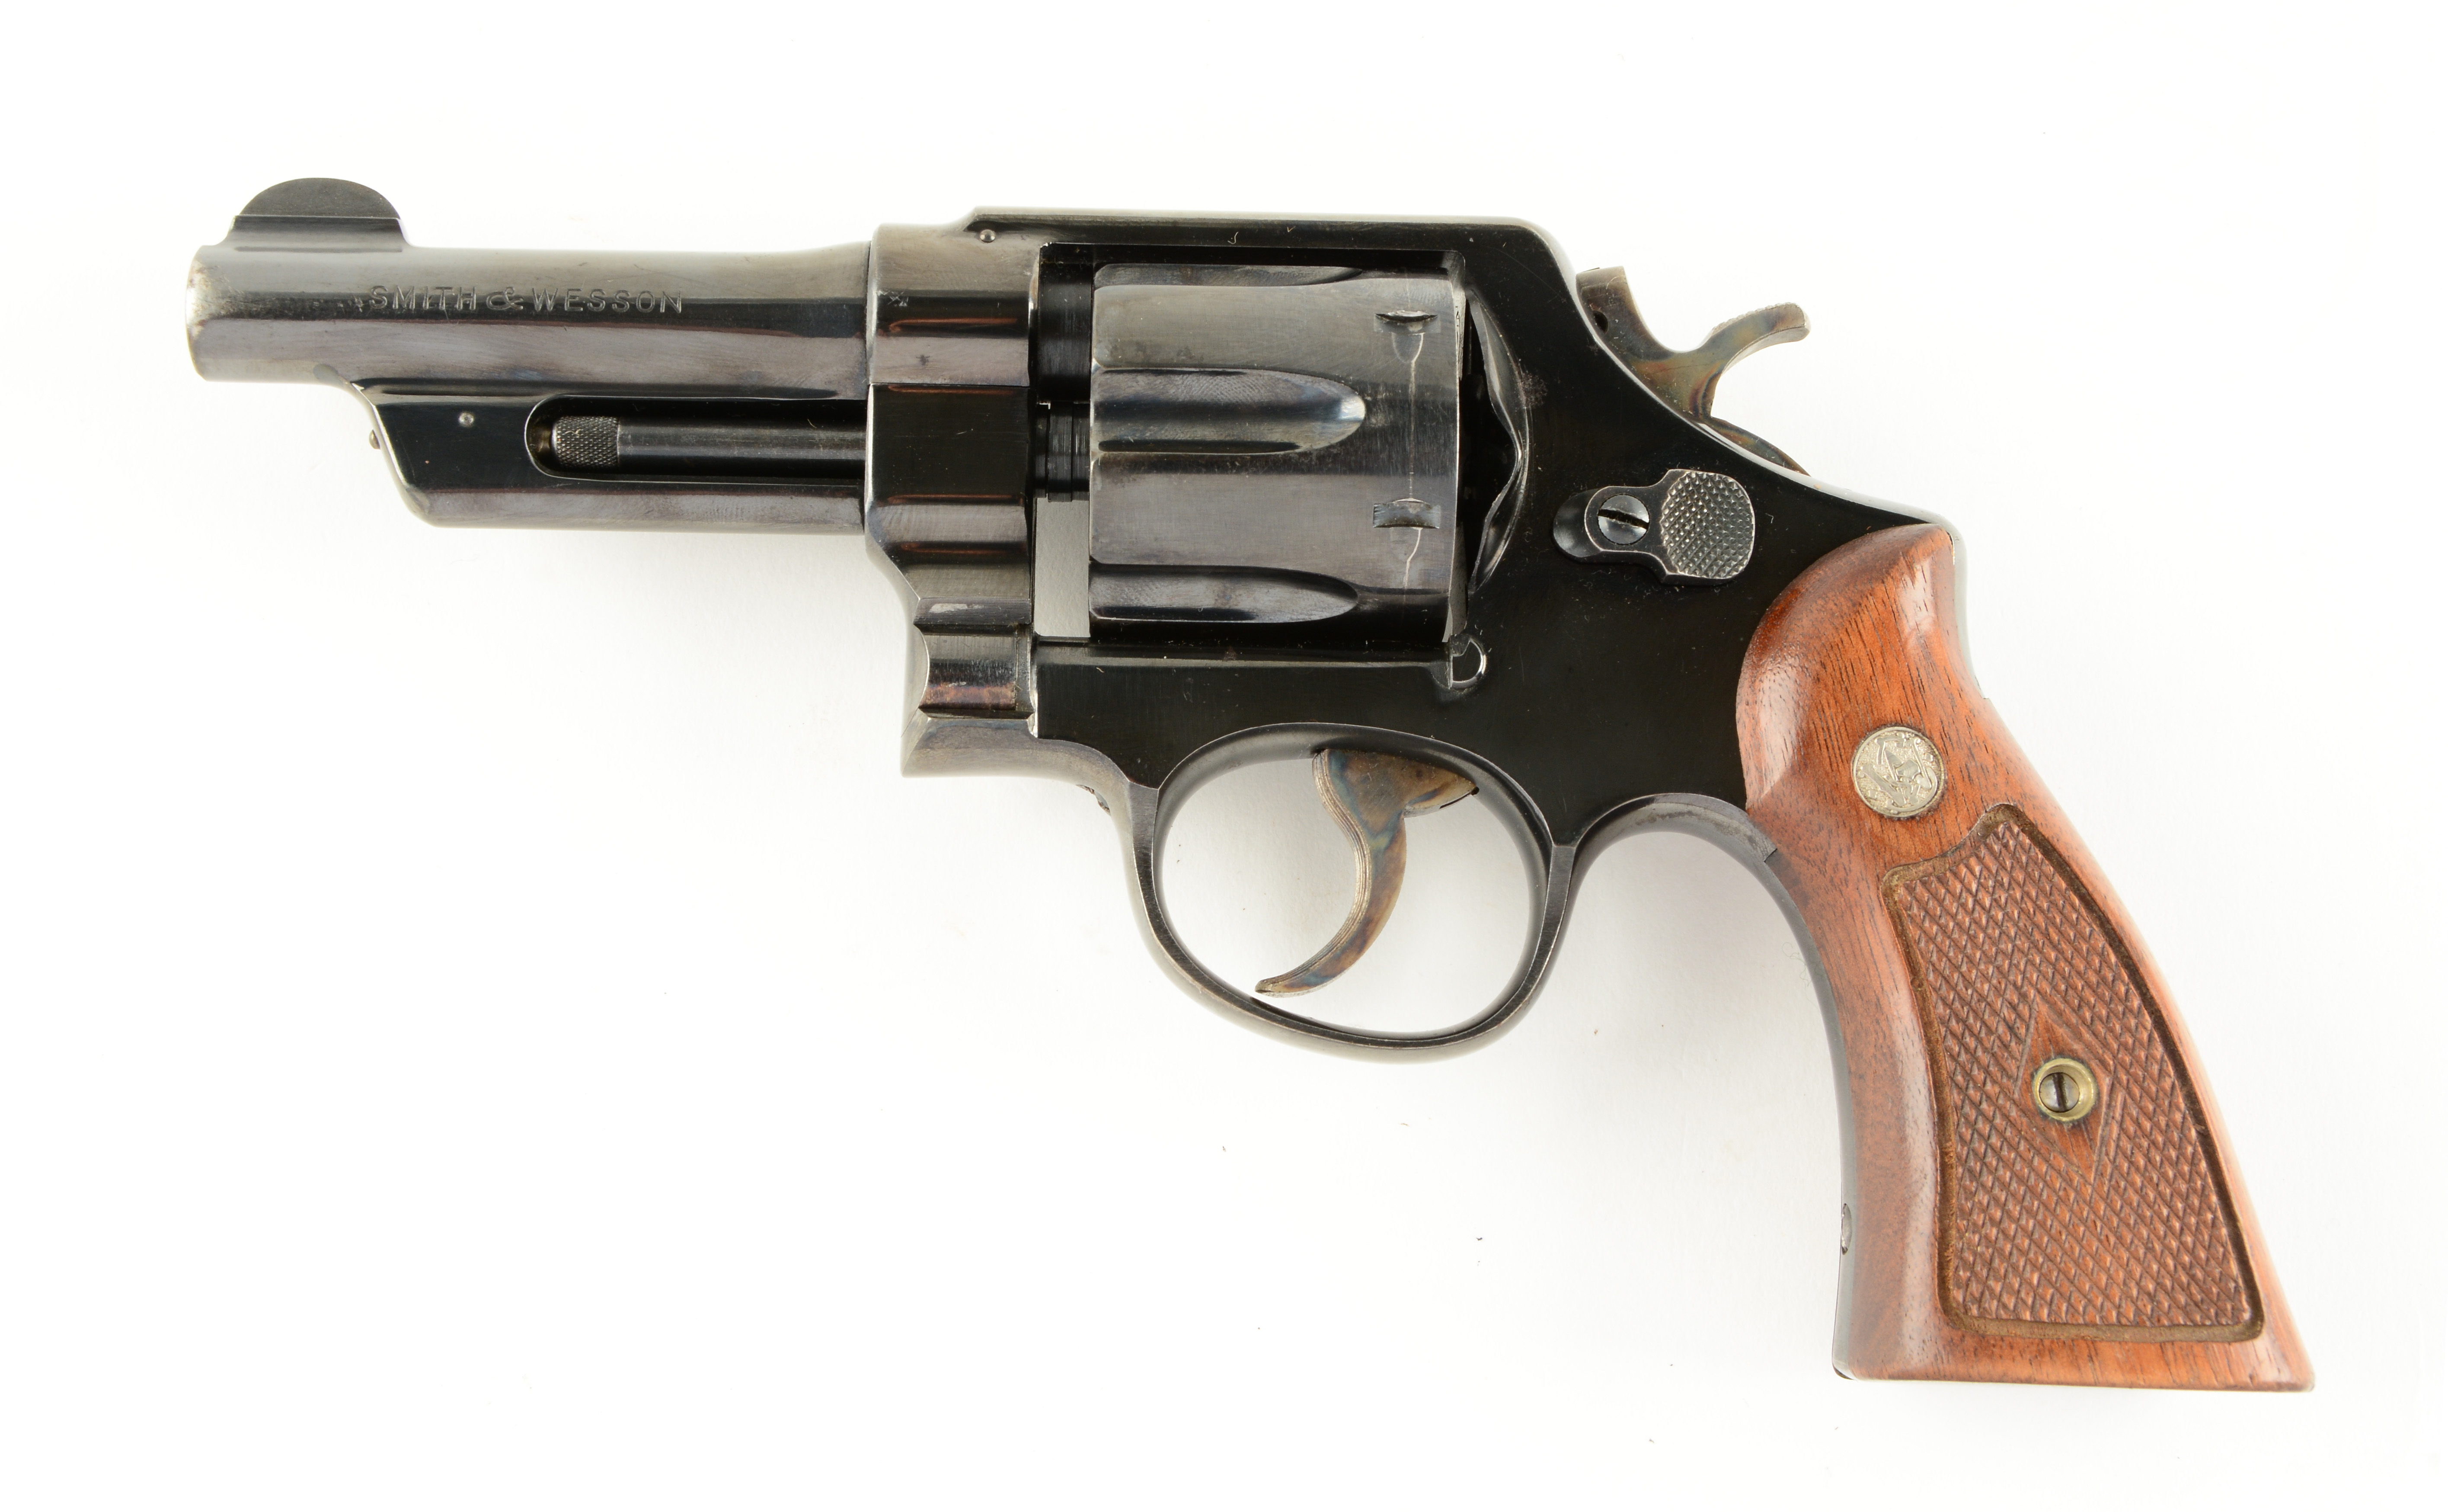 Smith and wesson 38 special revolver serial numbers by year